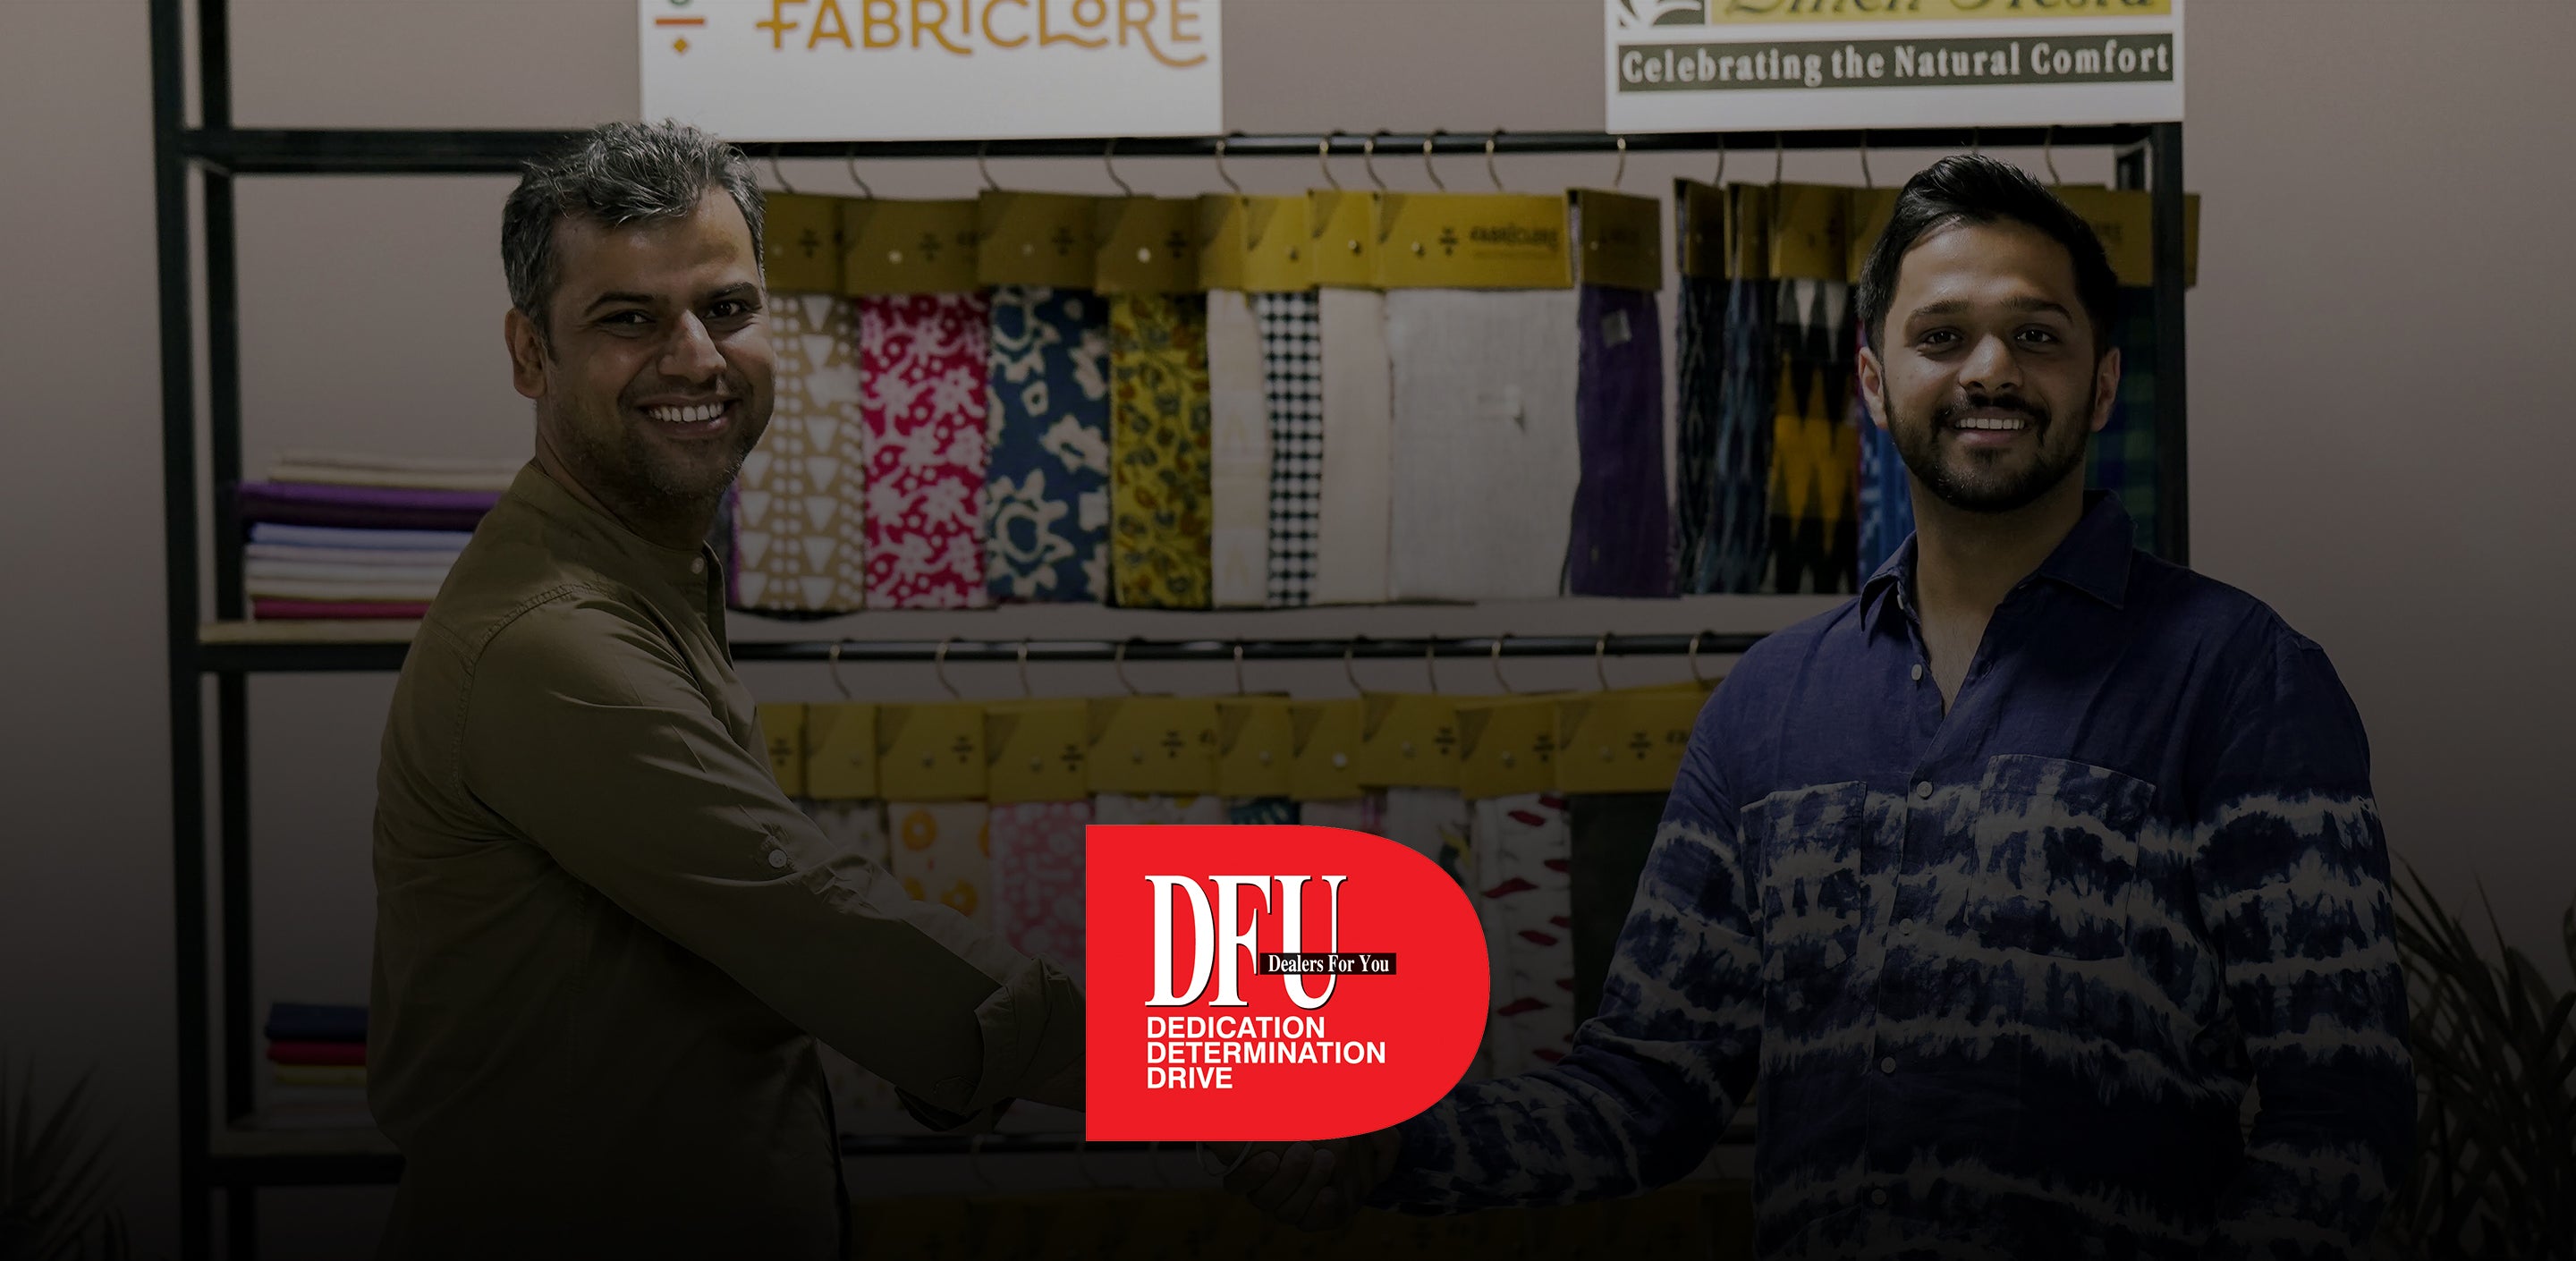 Fabriclore X Linen Fiesta:  A Collaboration Within Distinguished Manufacturers